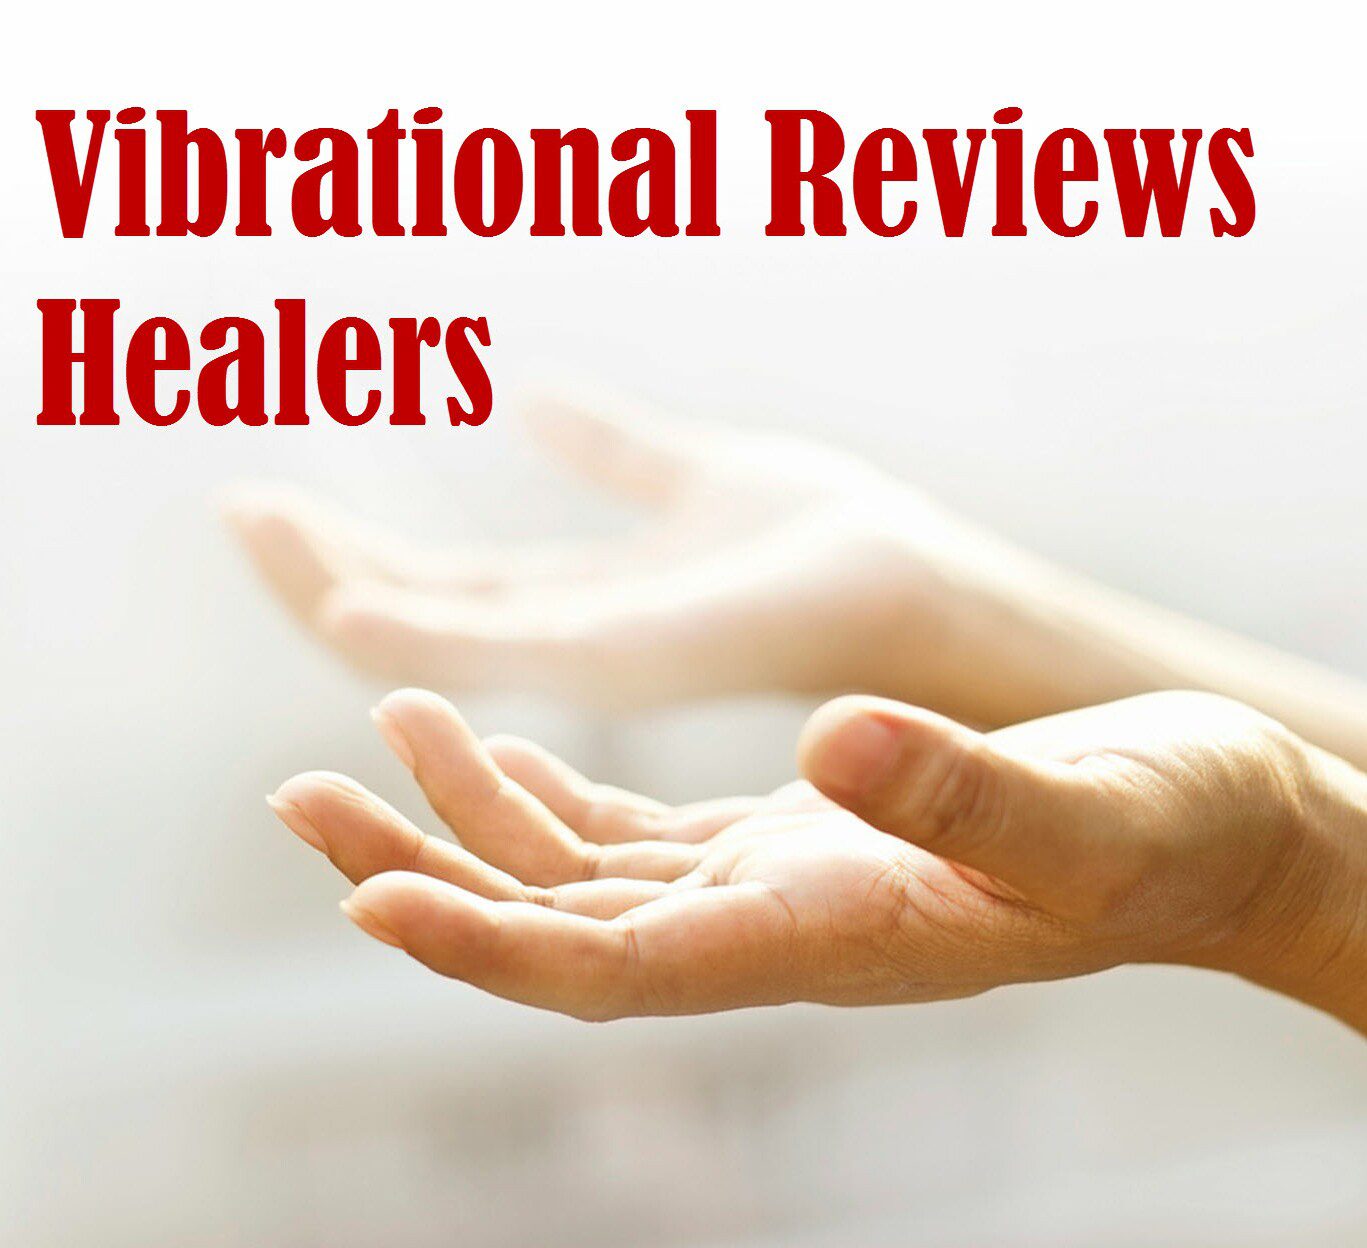 Some vibrational reviews for a change of pace